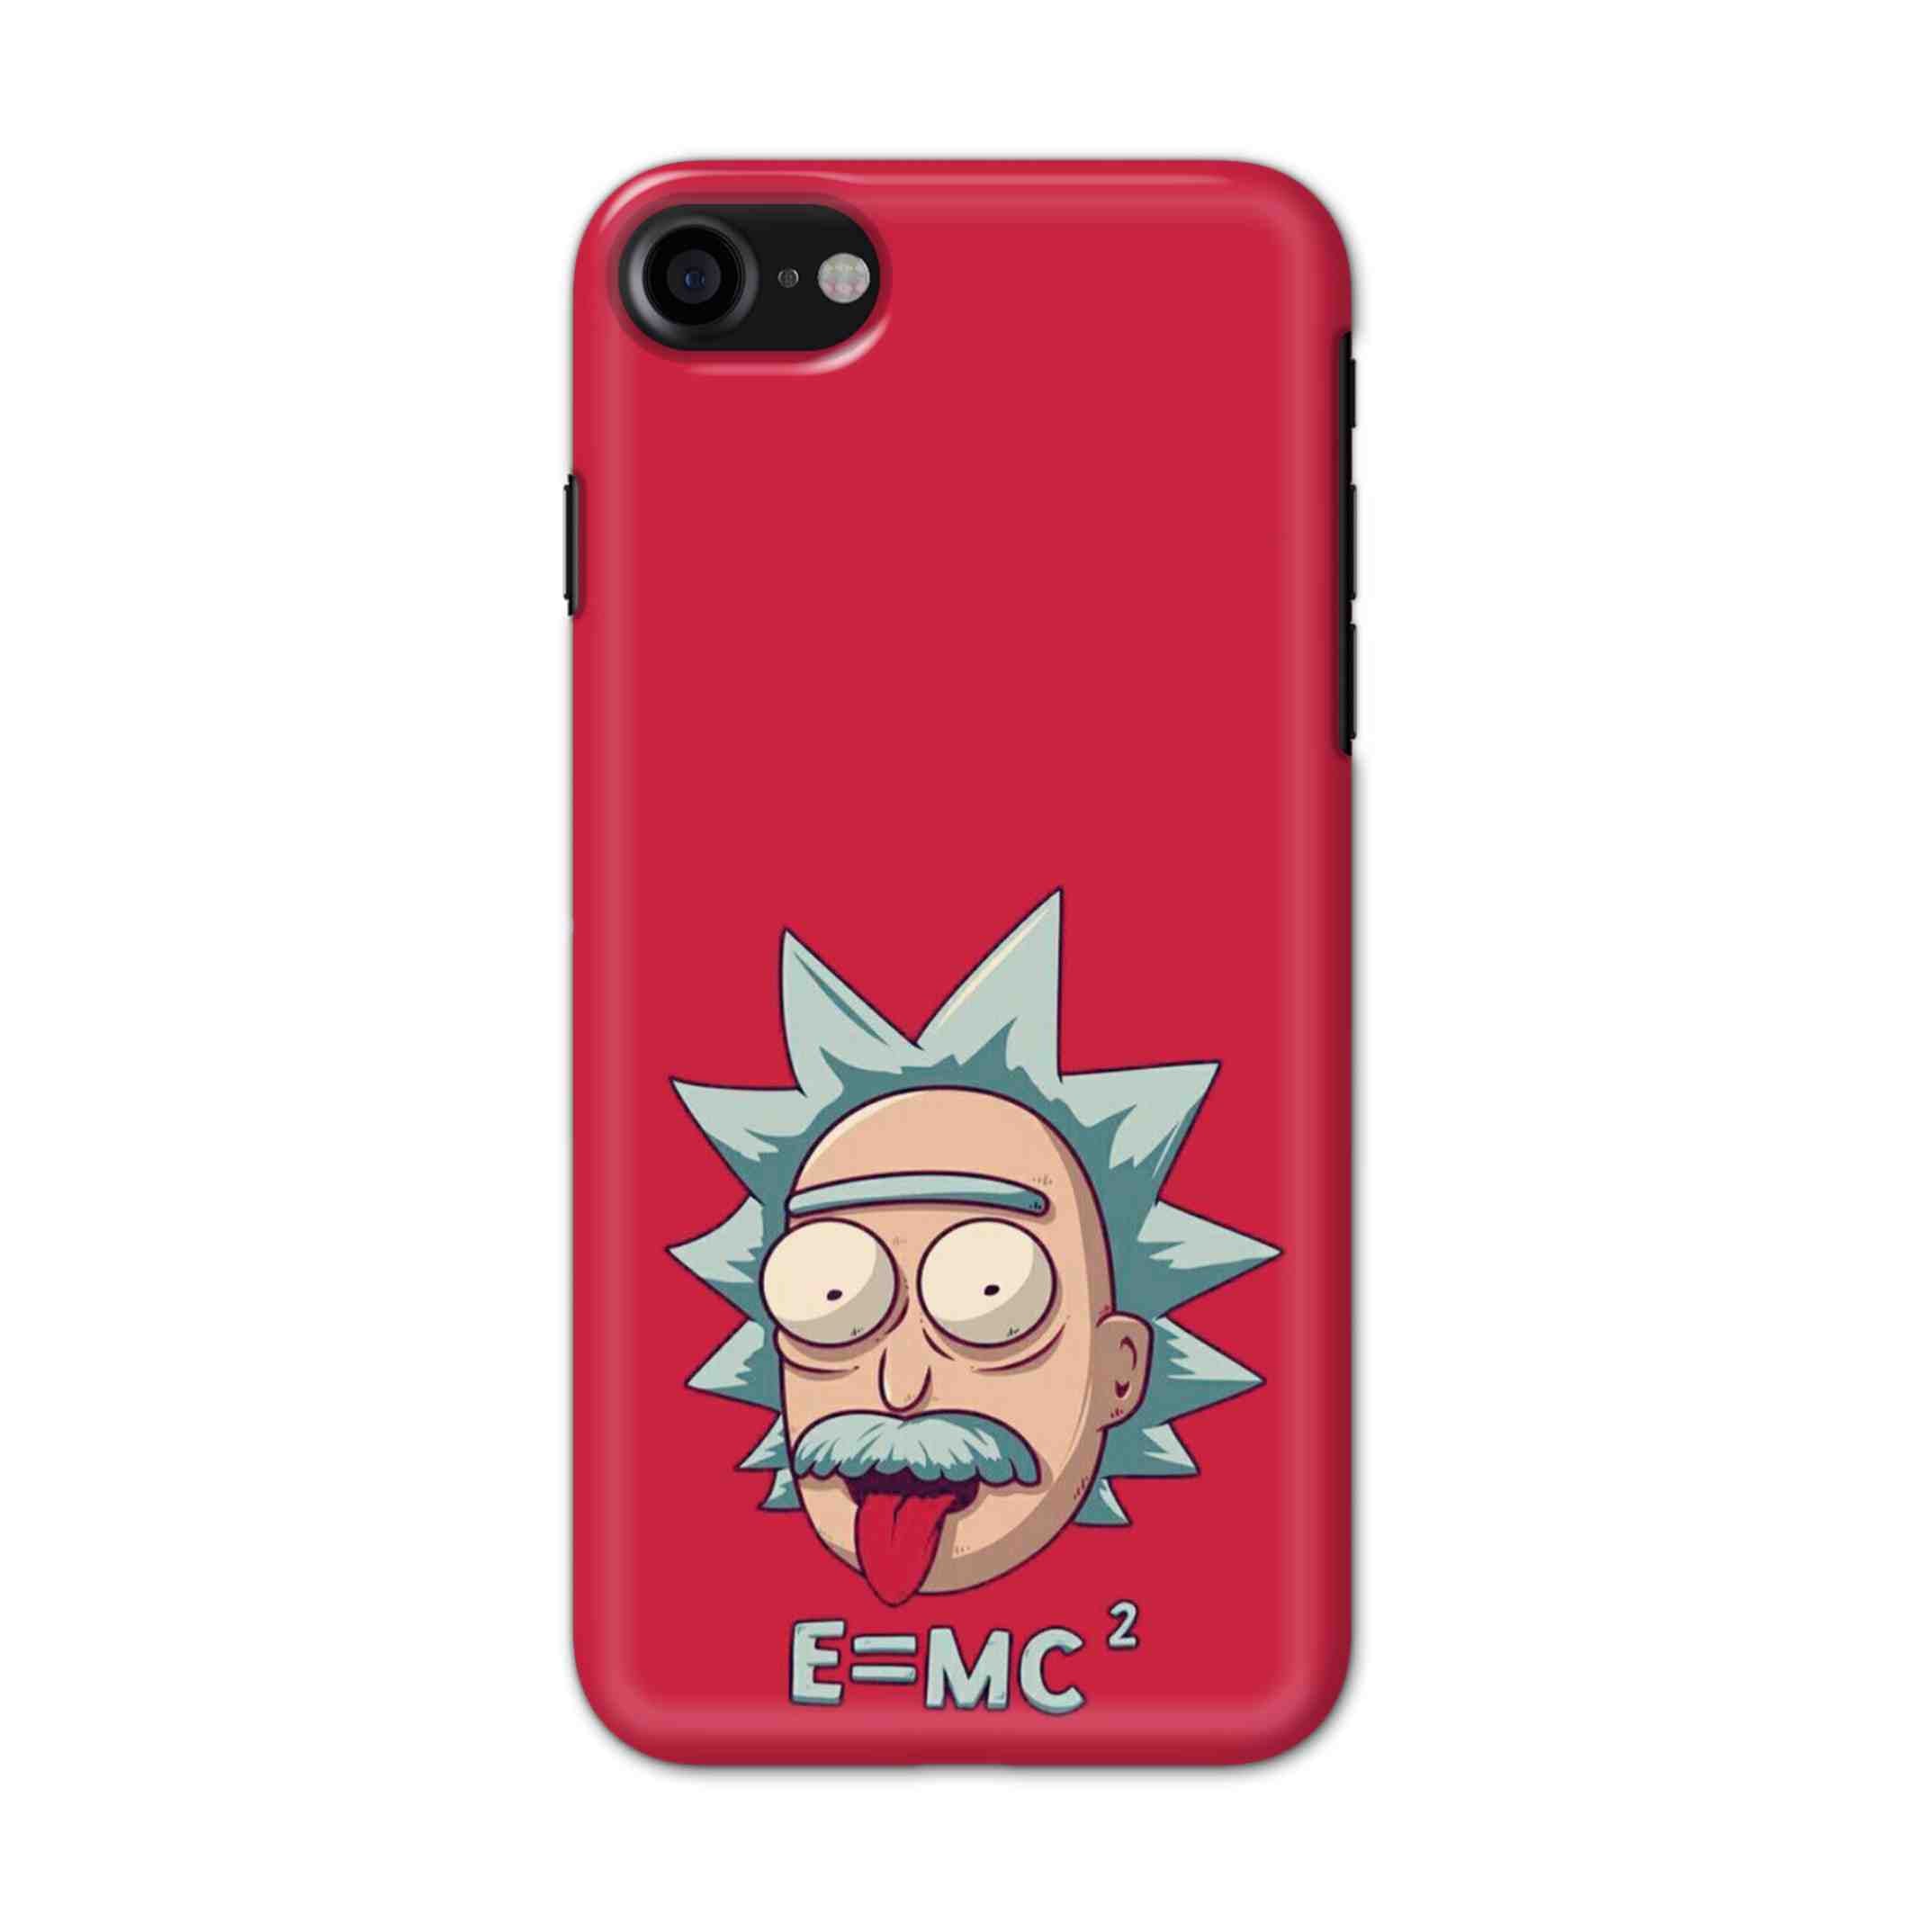 Buy E=Mc Hard Back Mobile Phone Case/Cover For iPhone 7 / 8 Online